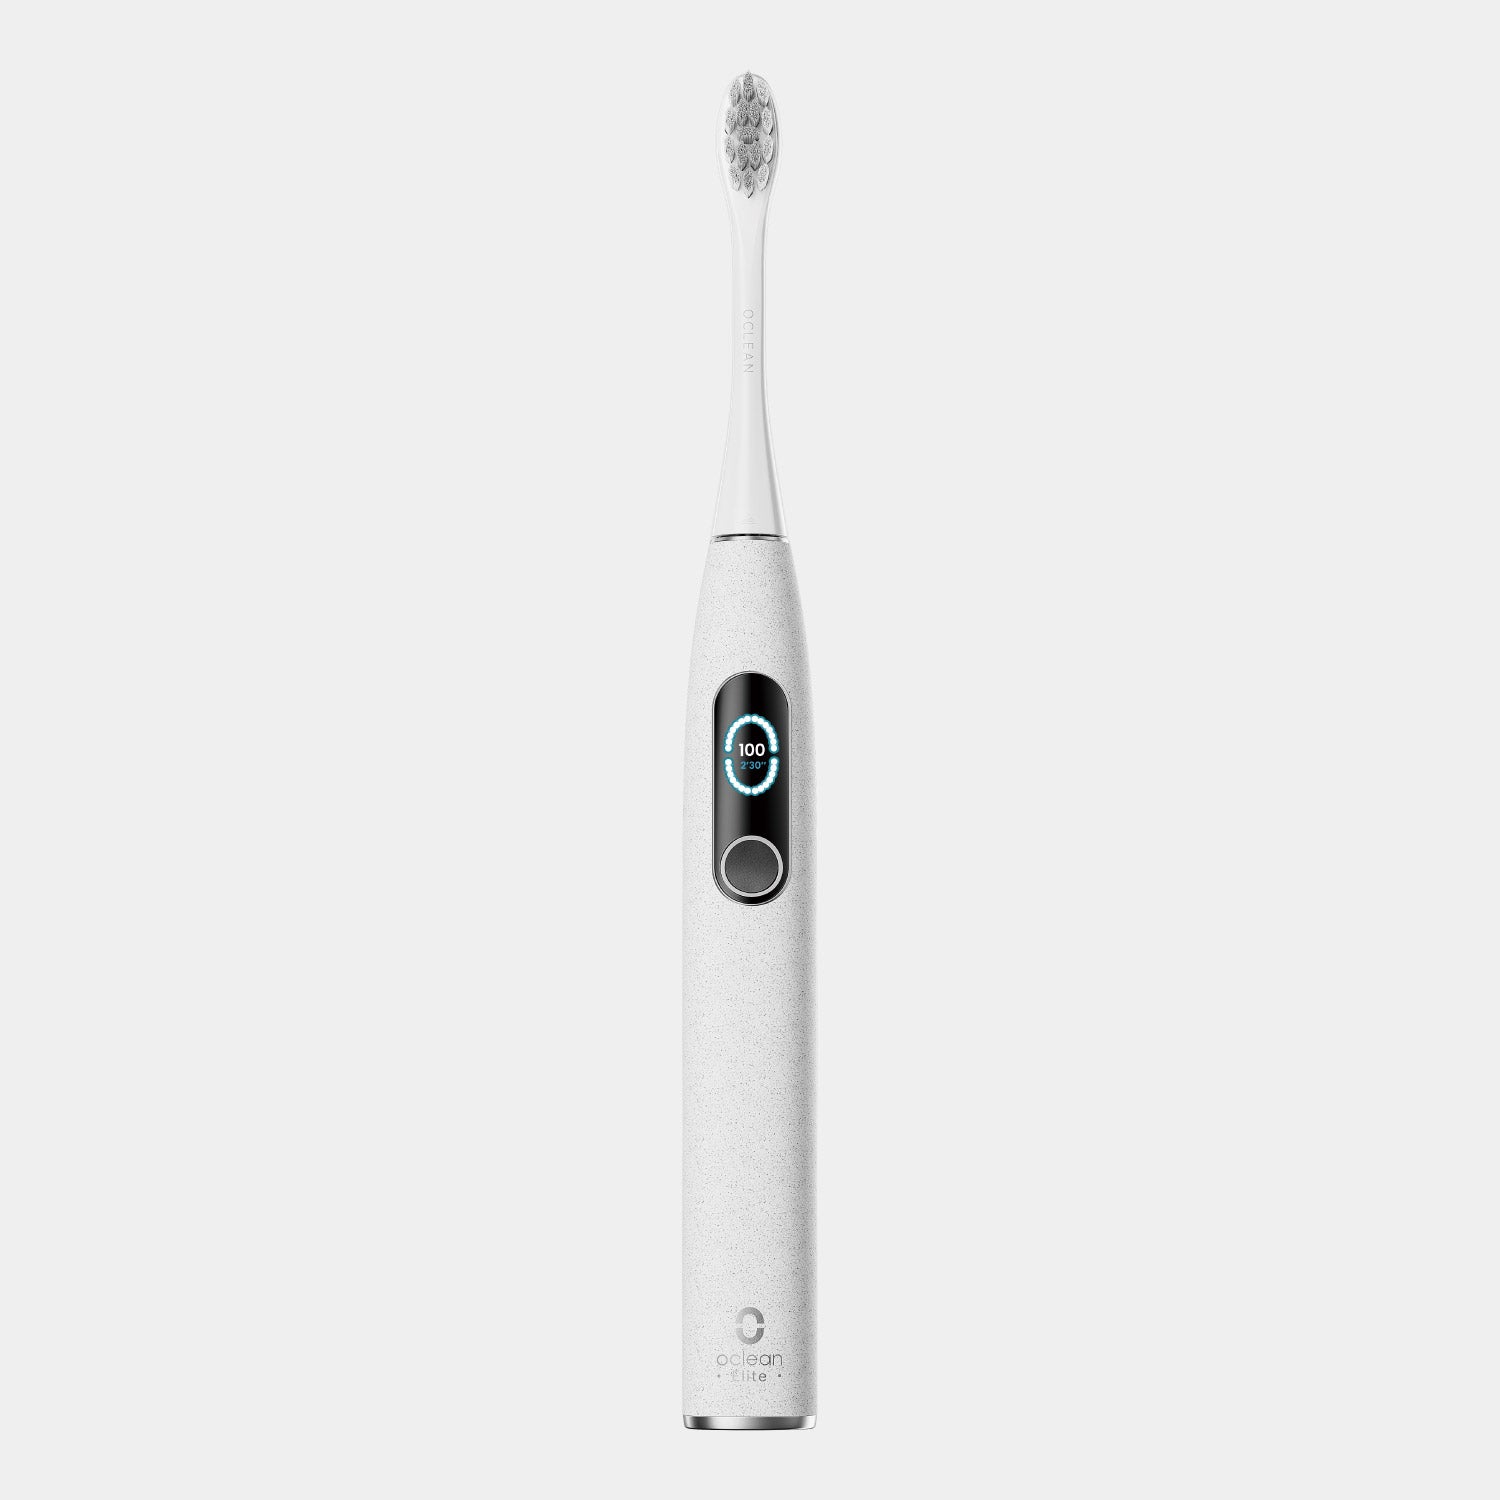 "Oclean X Pro Elite Sonic Electric Toothbrush-Toothbrushes-Oclean Global Store